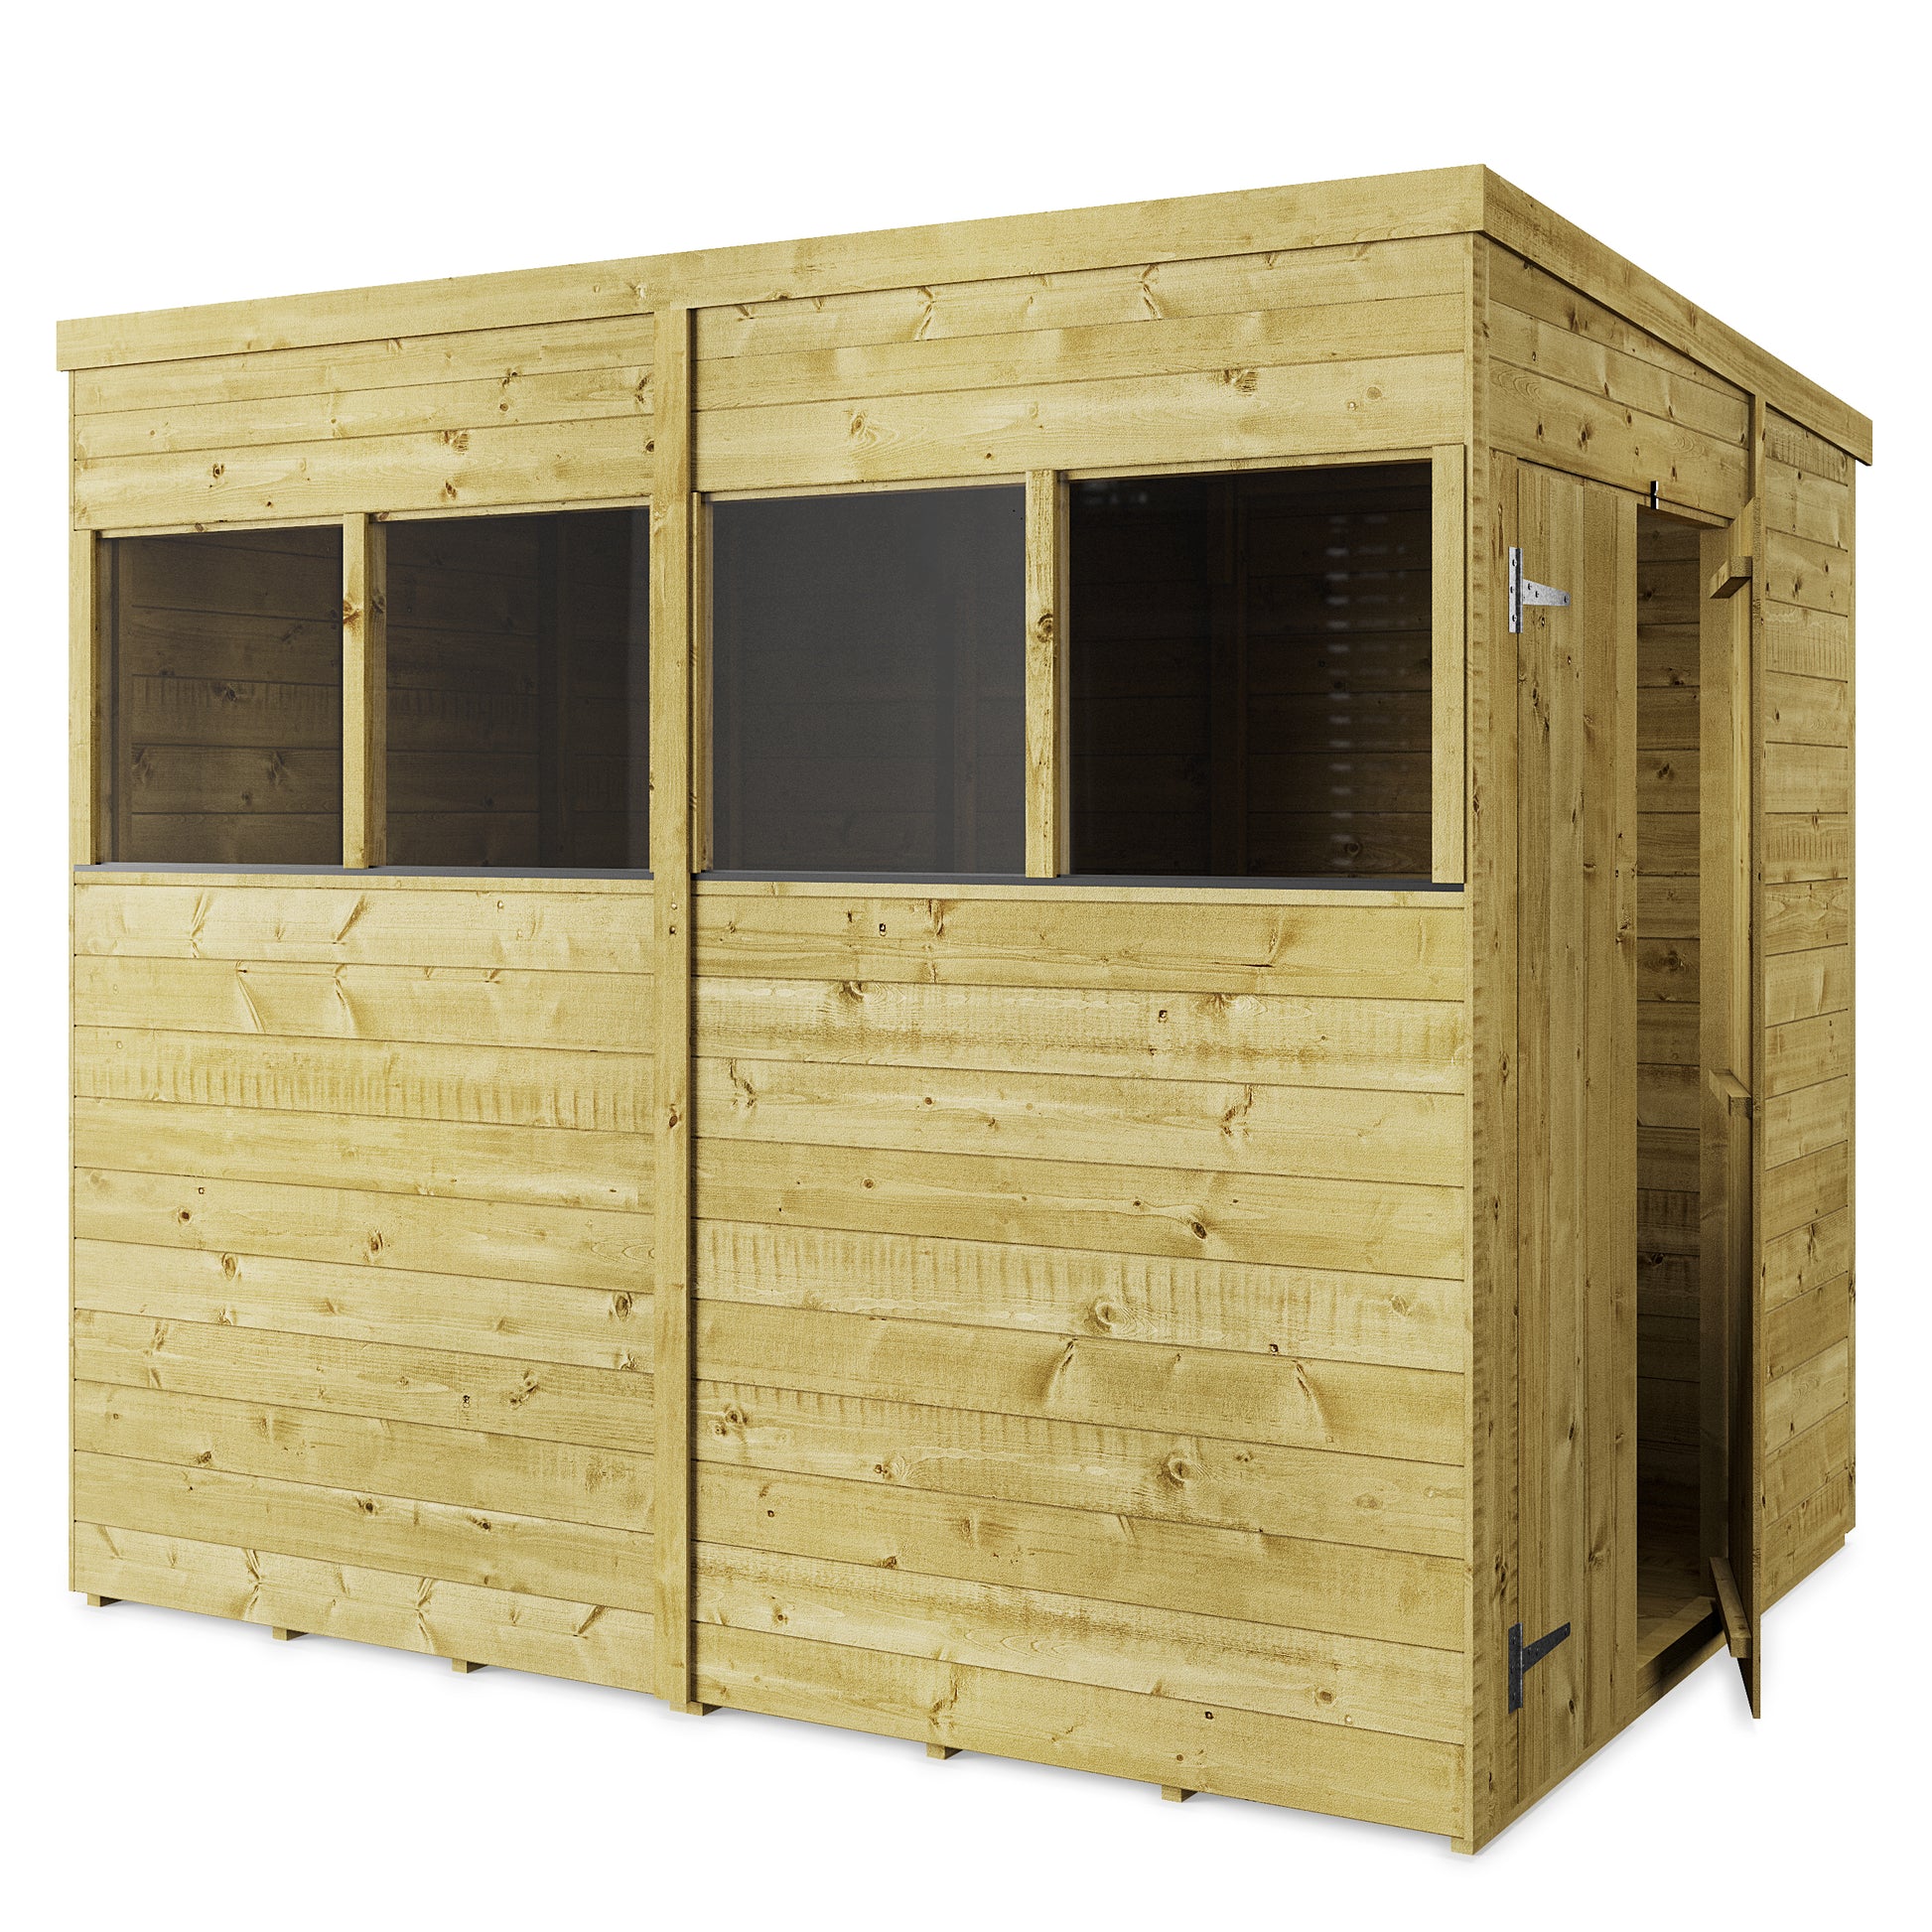 Store More 8 x 6 Tongue and Groove Pent Shed  Windowed - Premium Garden